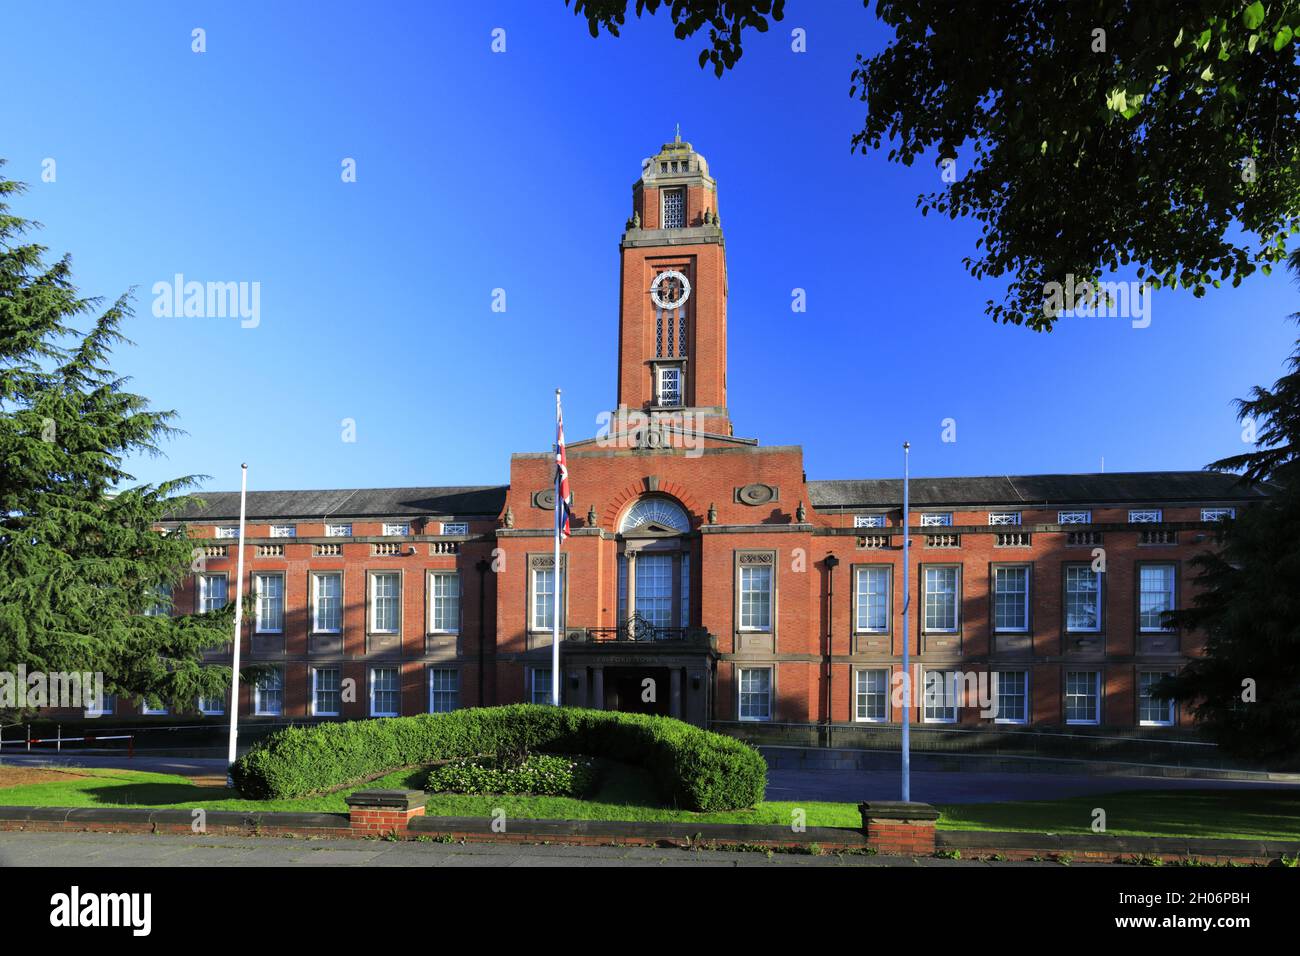 The Trafford Town Hall, Greater Manchester, Lancashire, England, UK Stock Photo